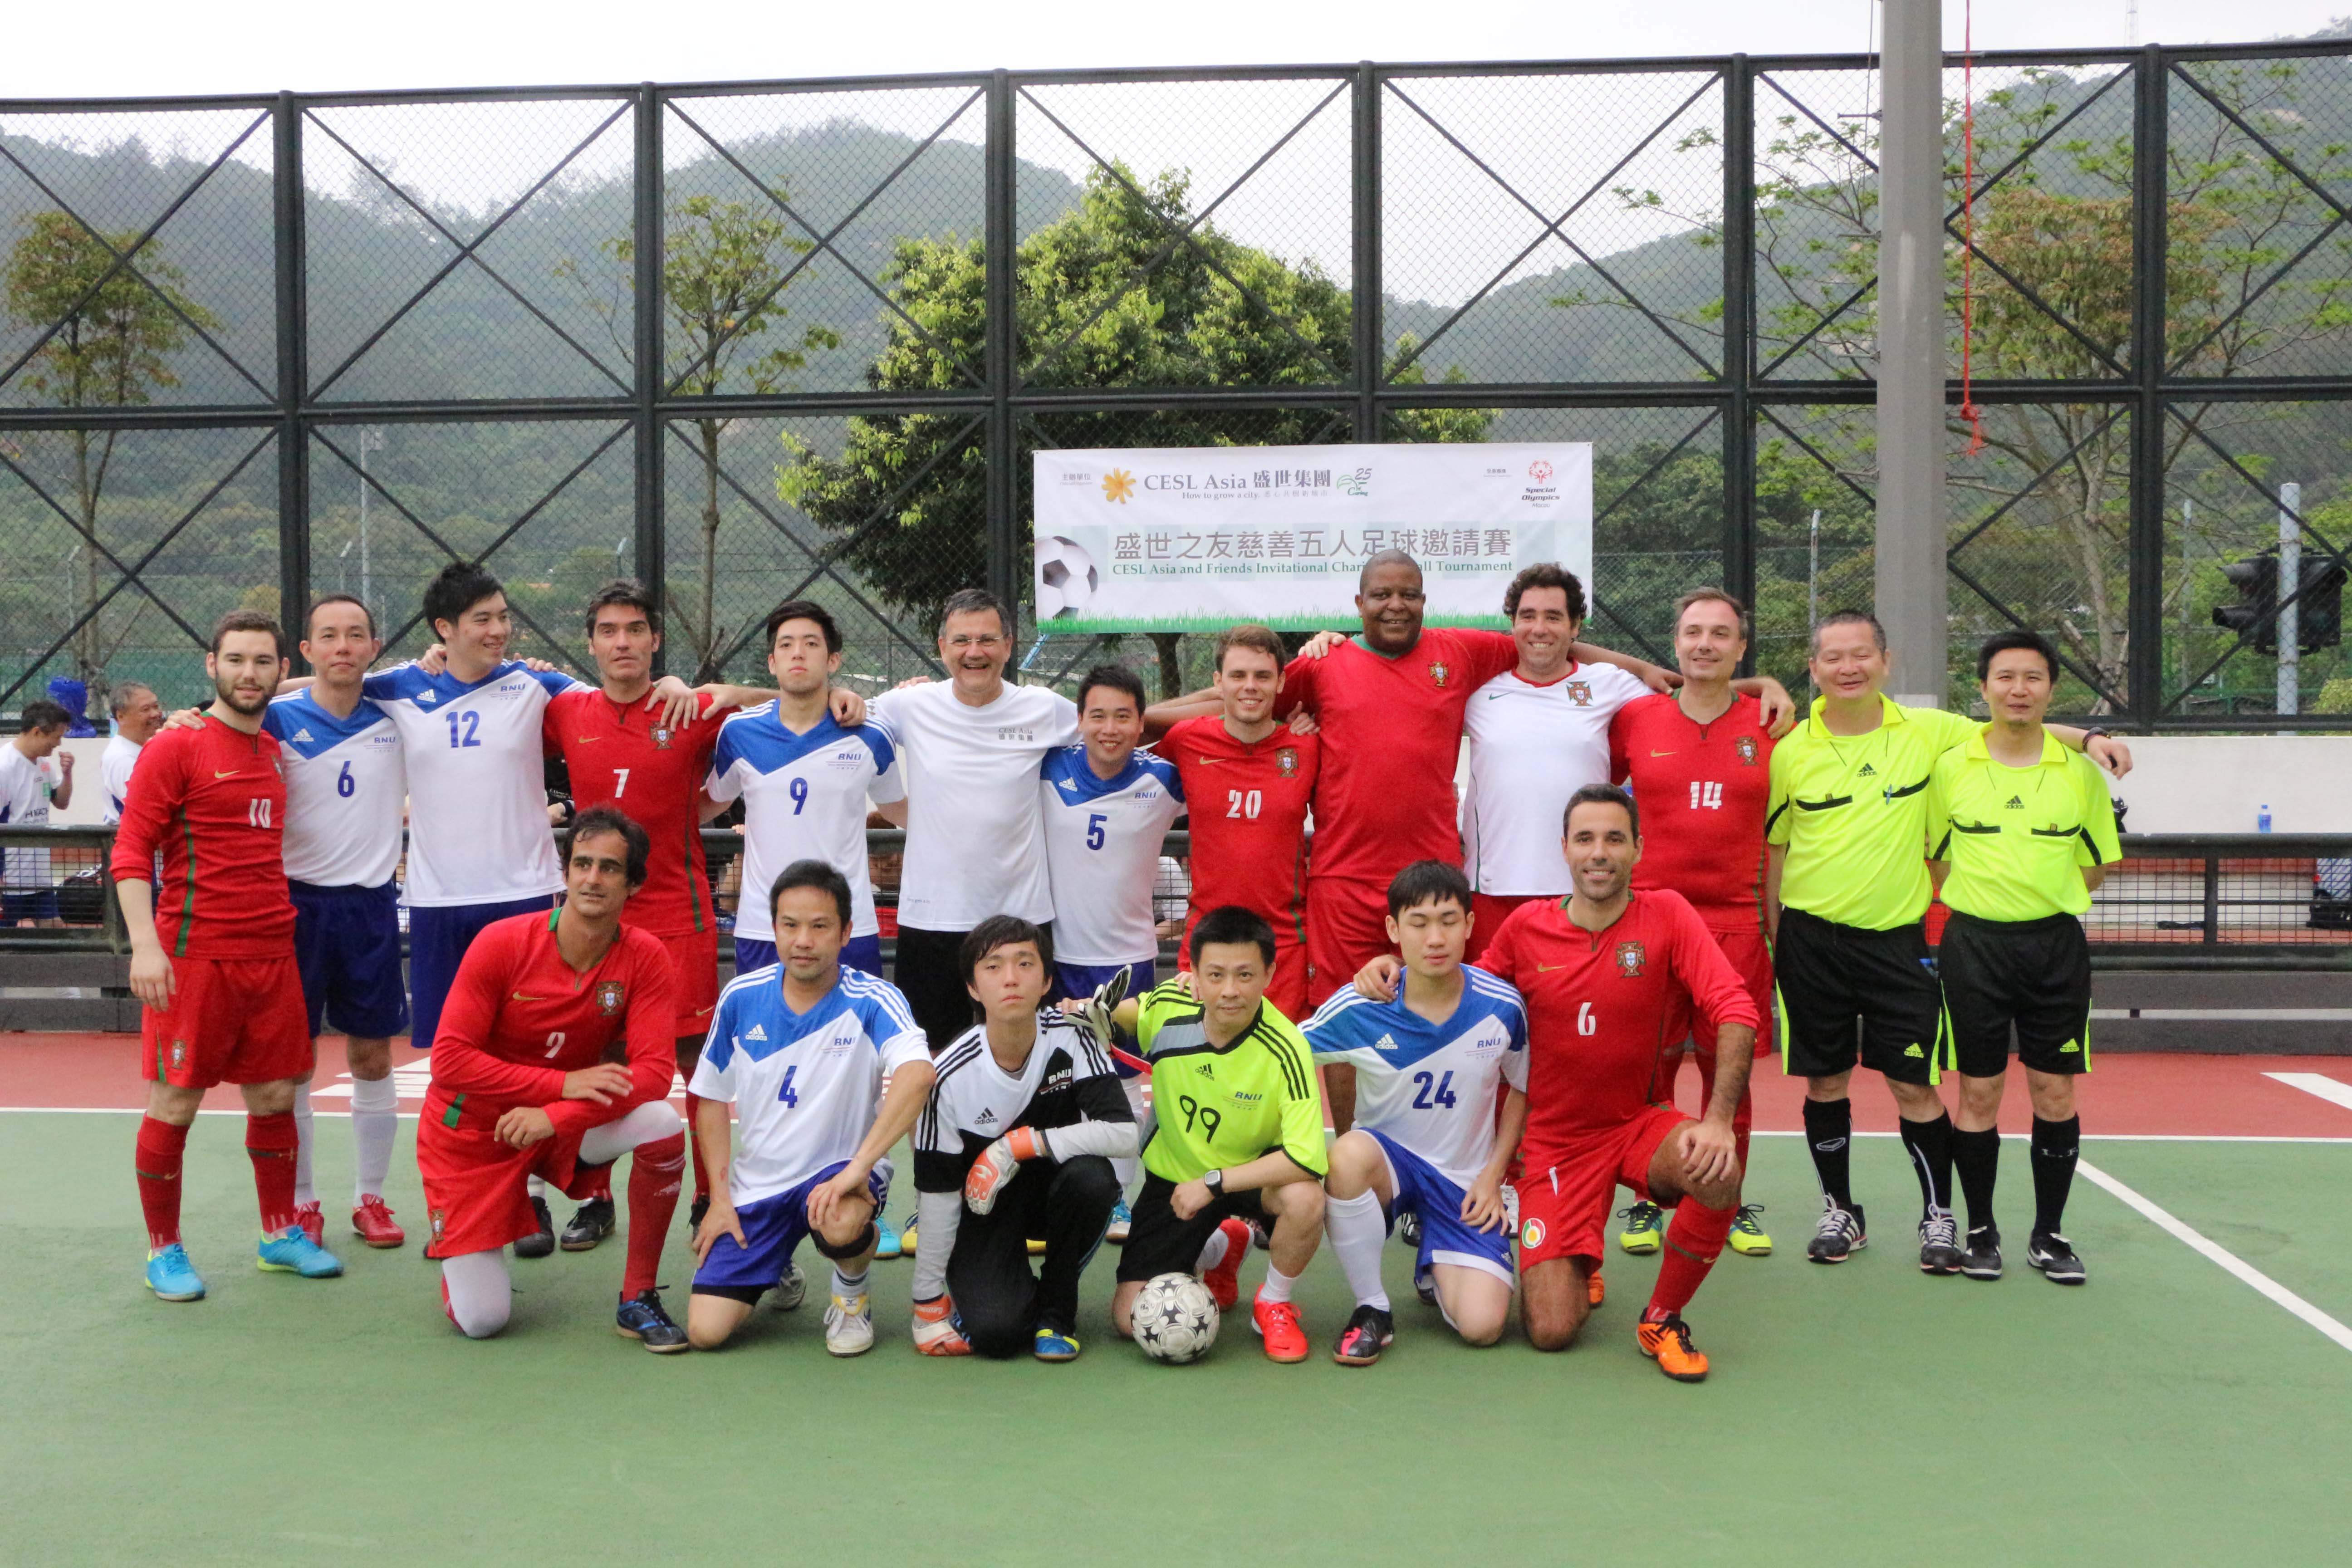 CESL Asia held Charity Football Tournament